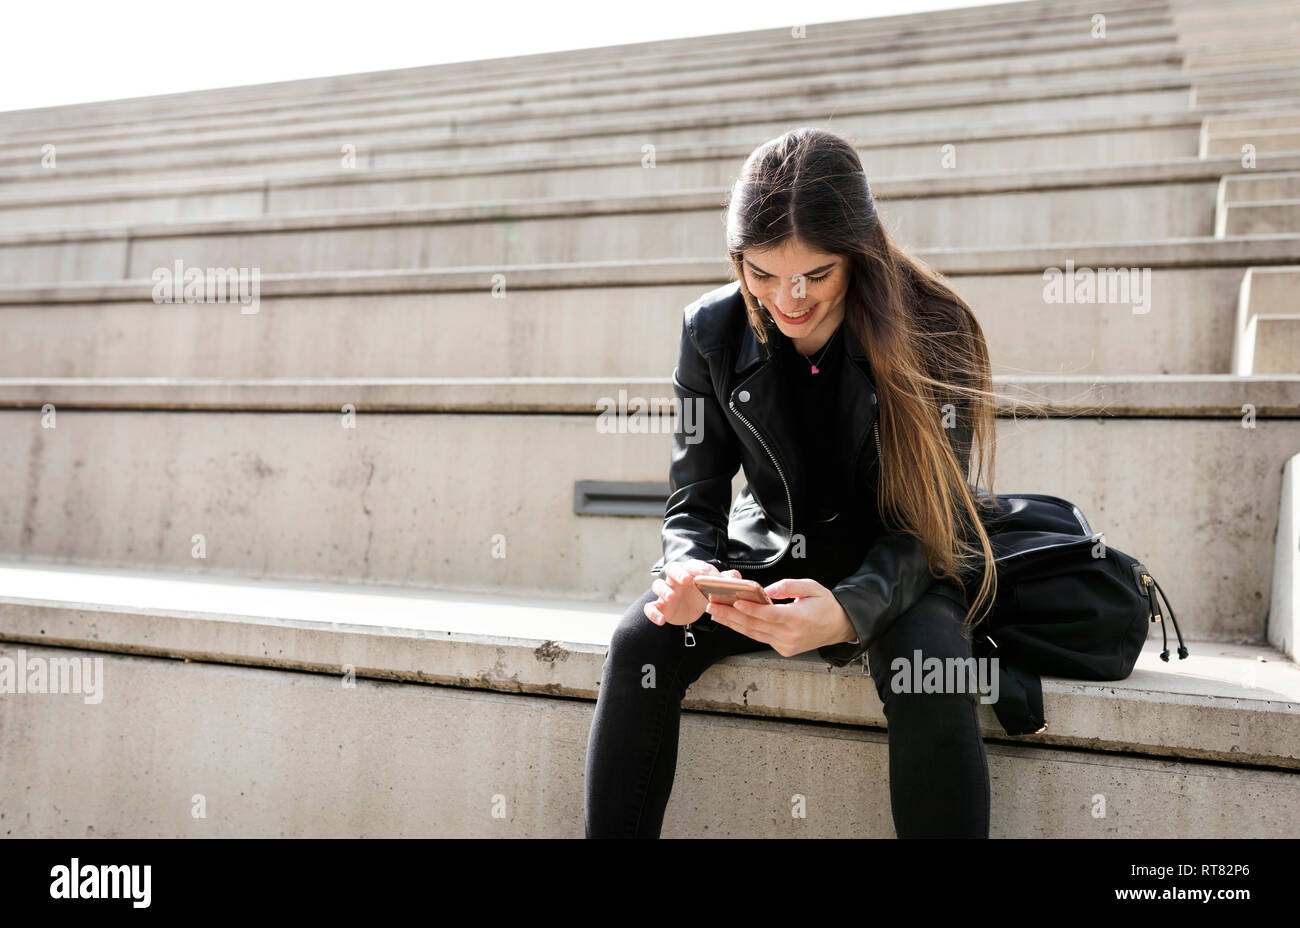 Smiling young woman sitting on stairs using cell phone Stock Photo